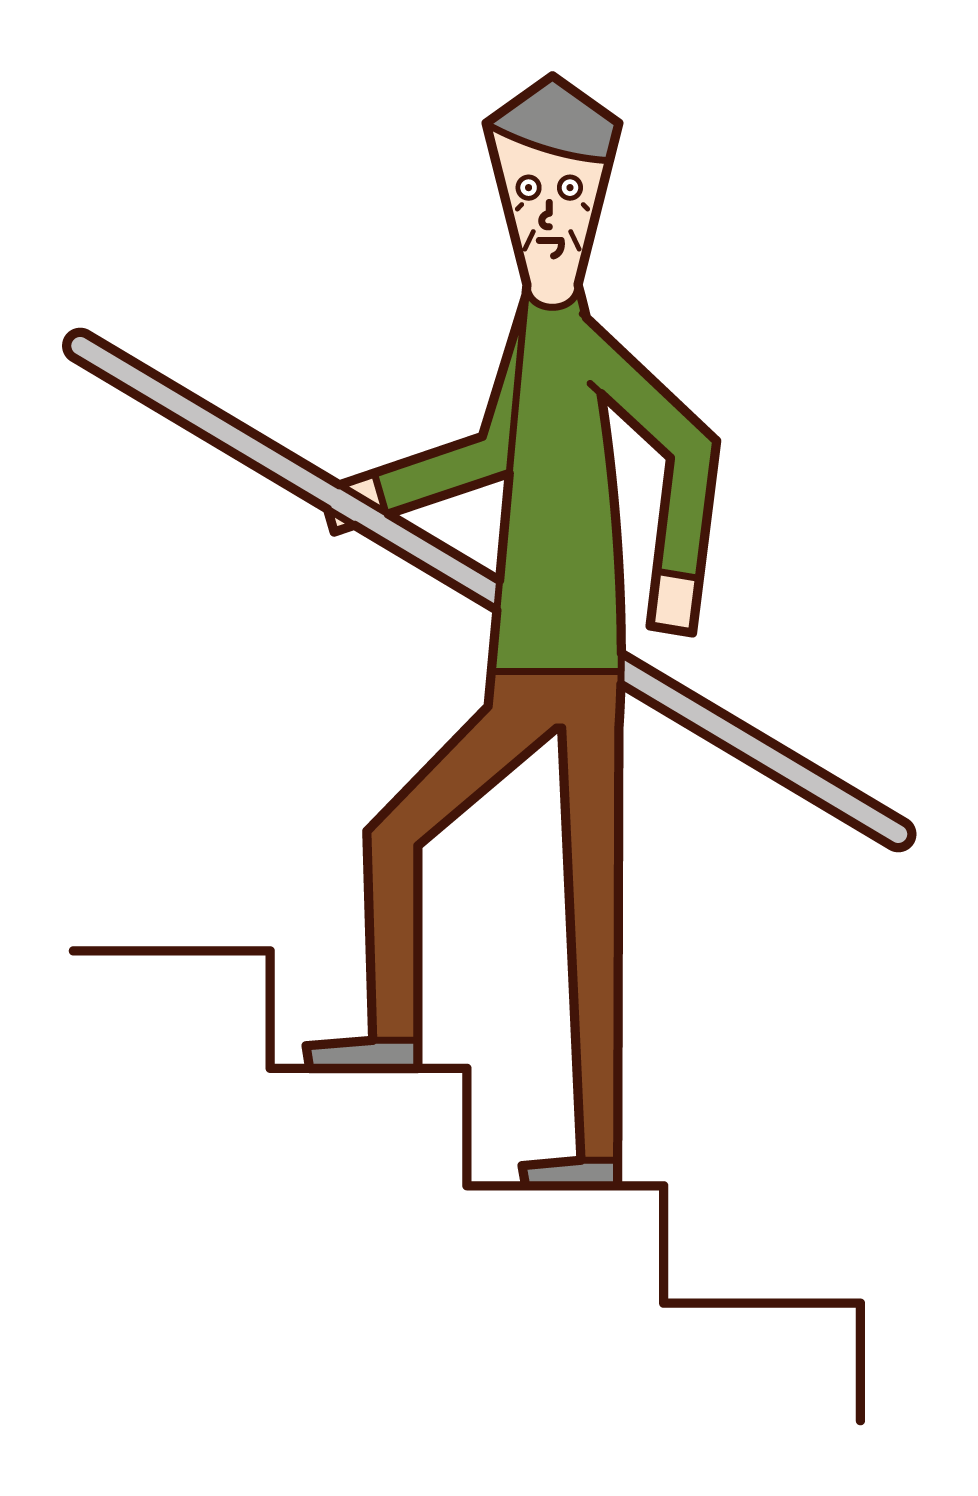 Illustration of a man (male) who hooks his leg and falls over a person